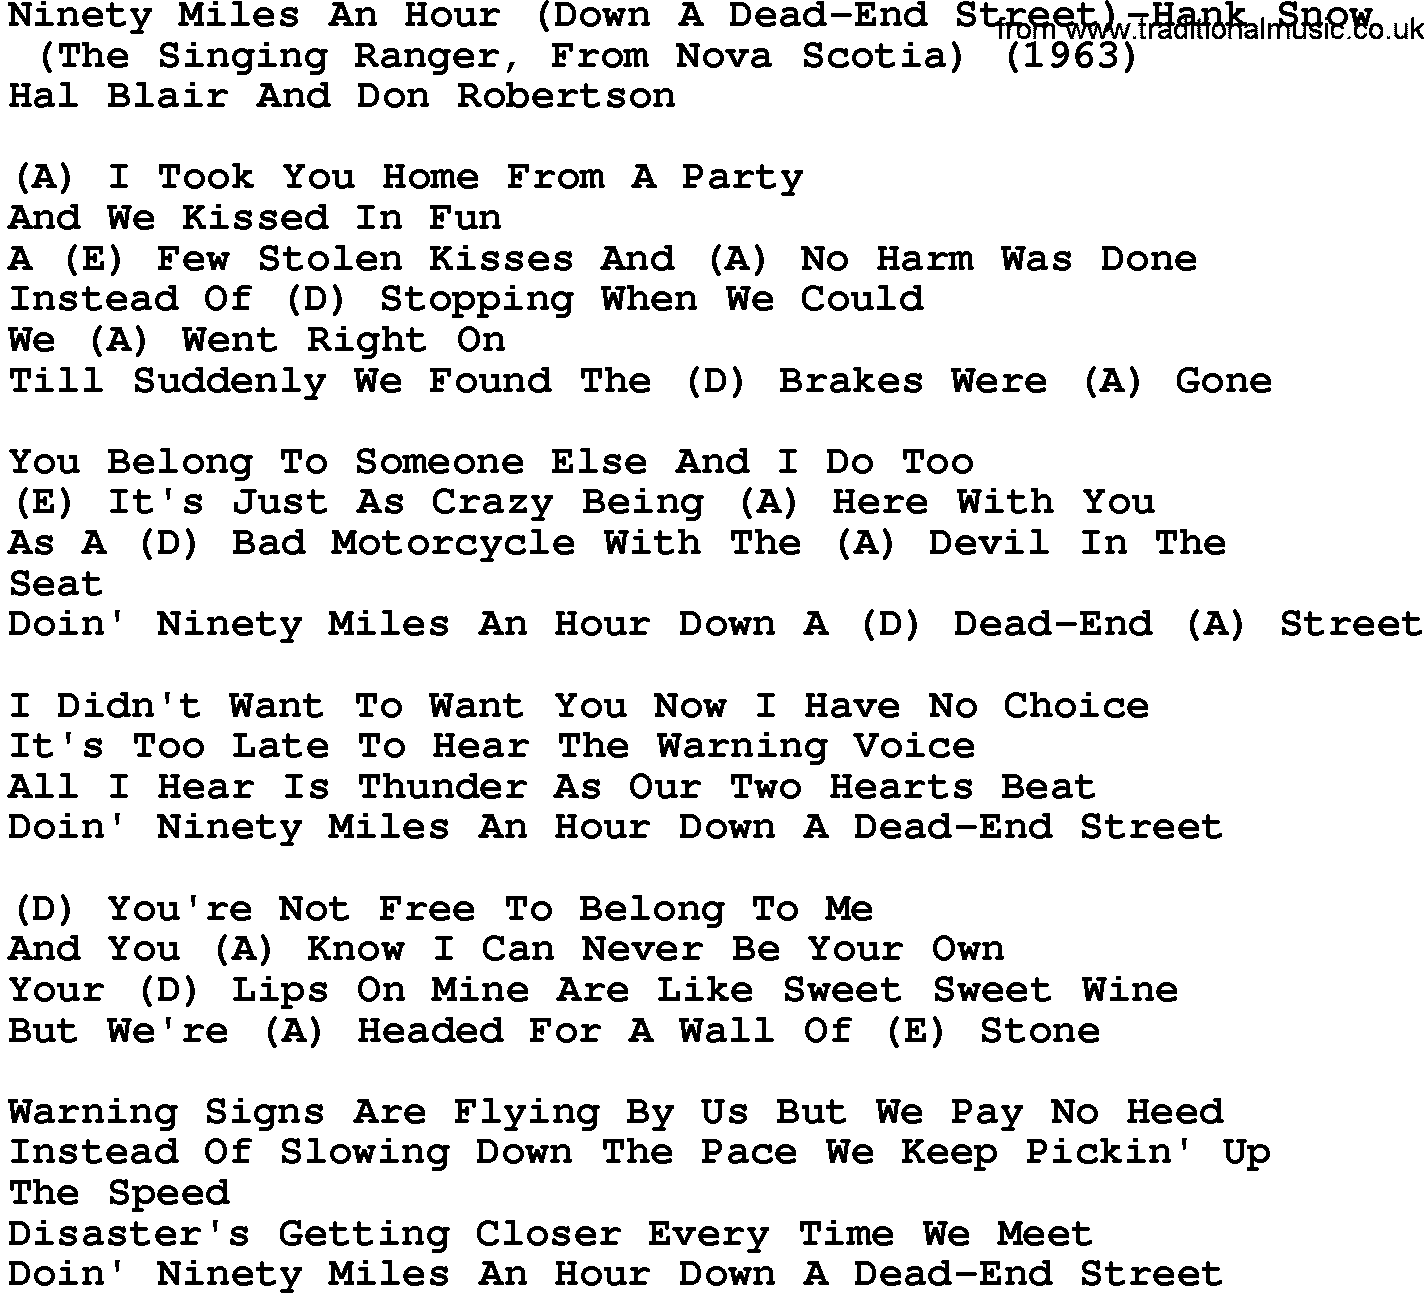 Country music song: Ninety Miles An Hour(Down A Dead-End Street)-Hank Snow lyrics and chords